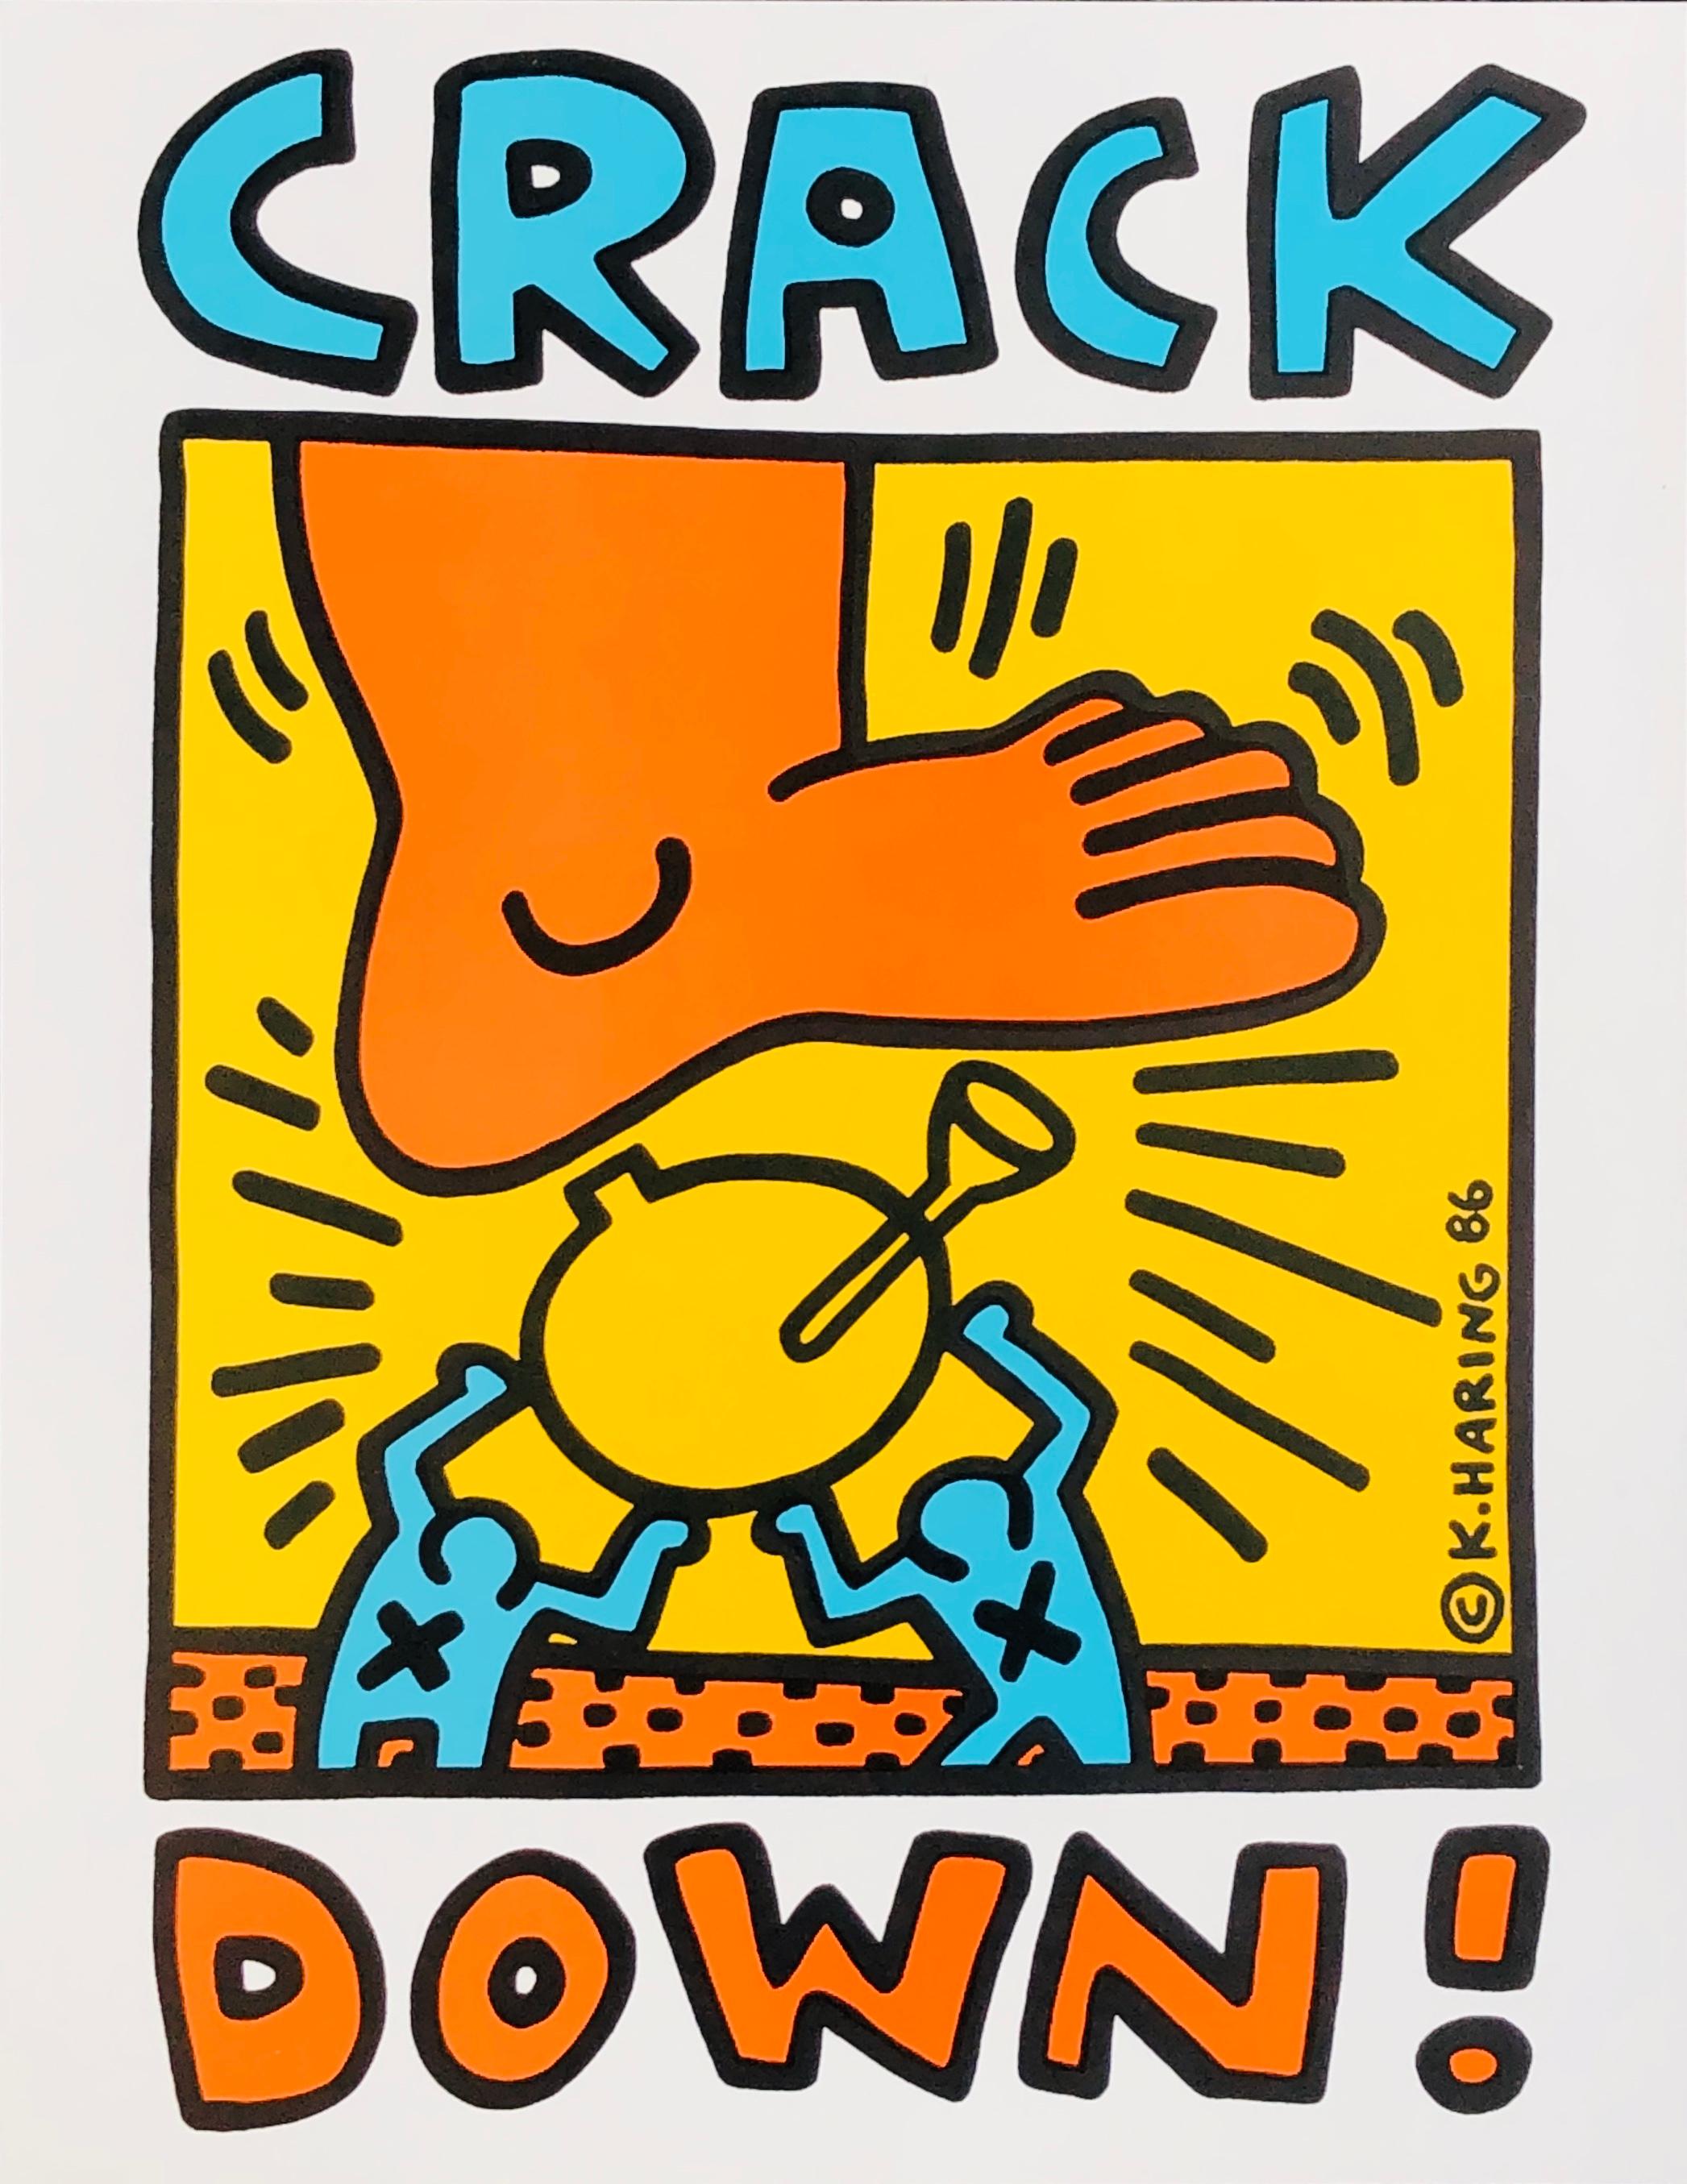 Keith Haring Crack Down!
Vintage original Keith Haring anti-drug poster, 1986

Medium: Off-set lithograph on heavy weight paper consisting of well preserved bright, color ink

Dimensions: 17 x 22 inches.
Minor signs of handling; otherwise excellent